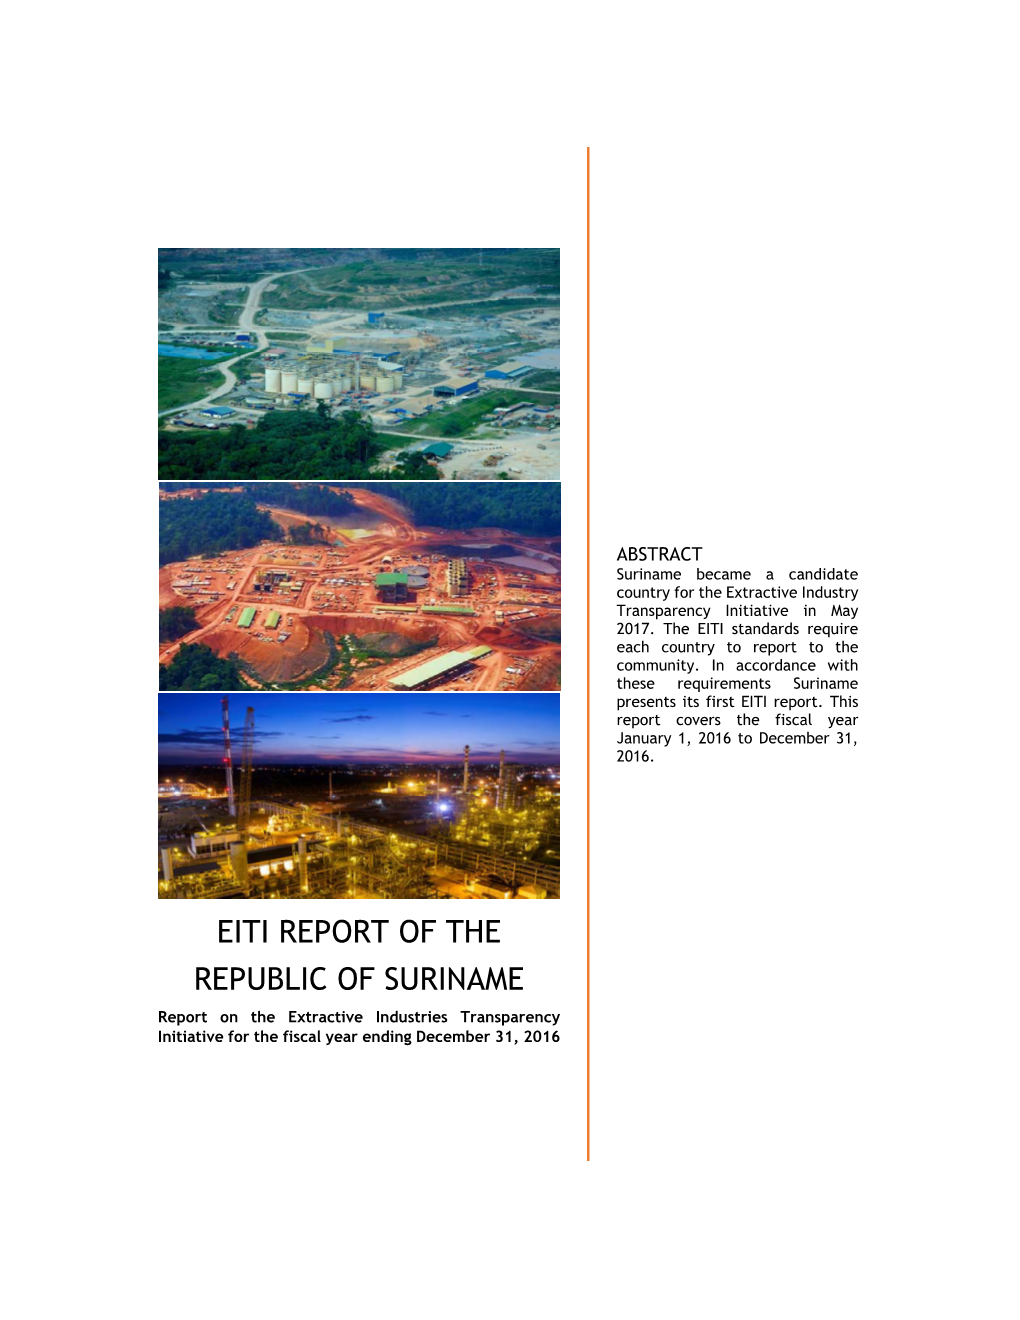 EITI REPORT of the REPUBLIC of SURINAME Report on the Extractive Industries Transparency Initiative for the Fiscal Year Ending December 31, 2016